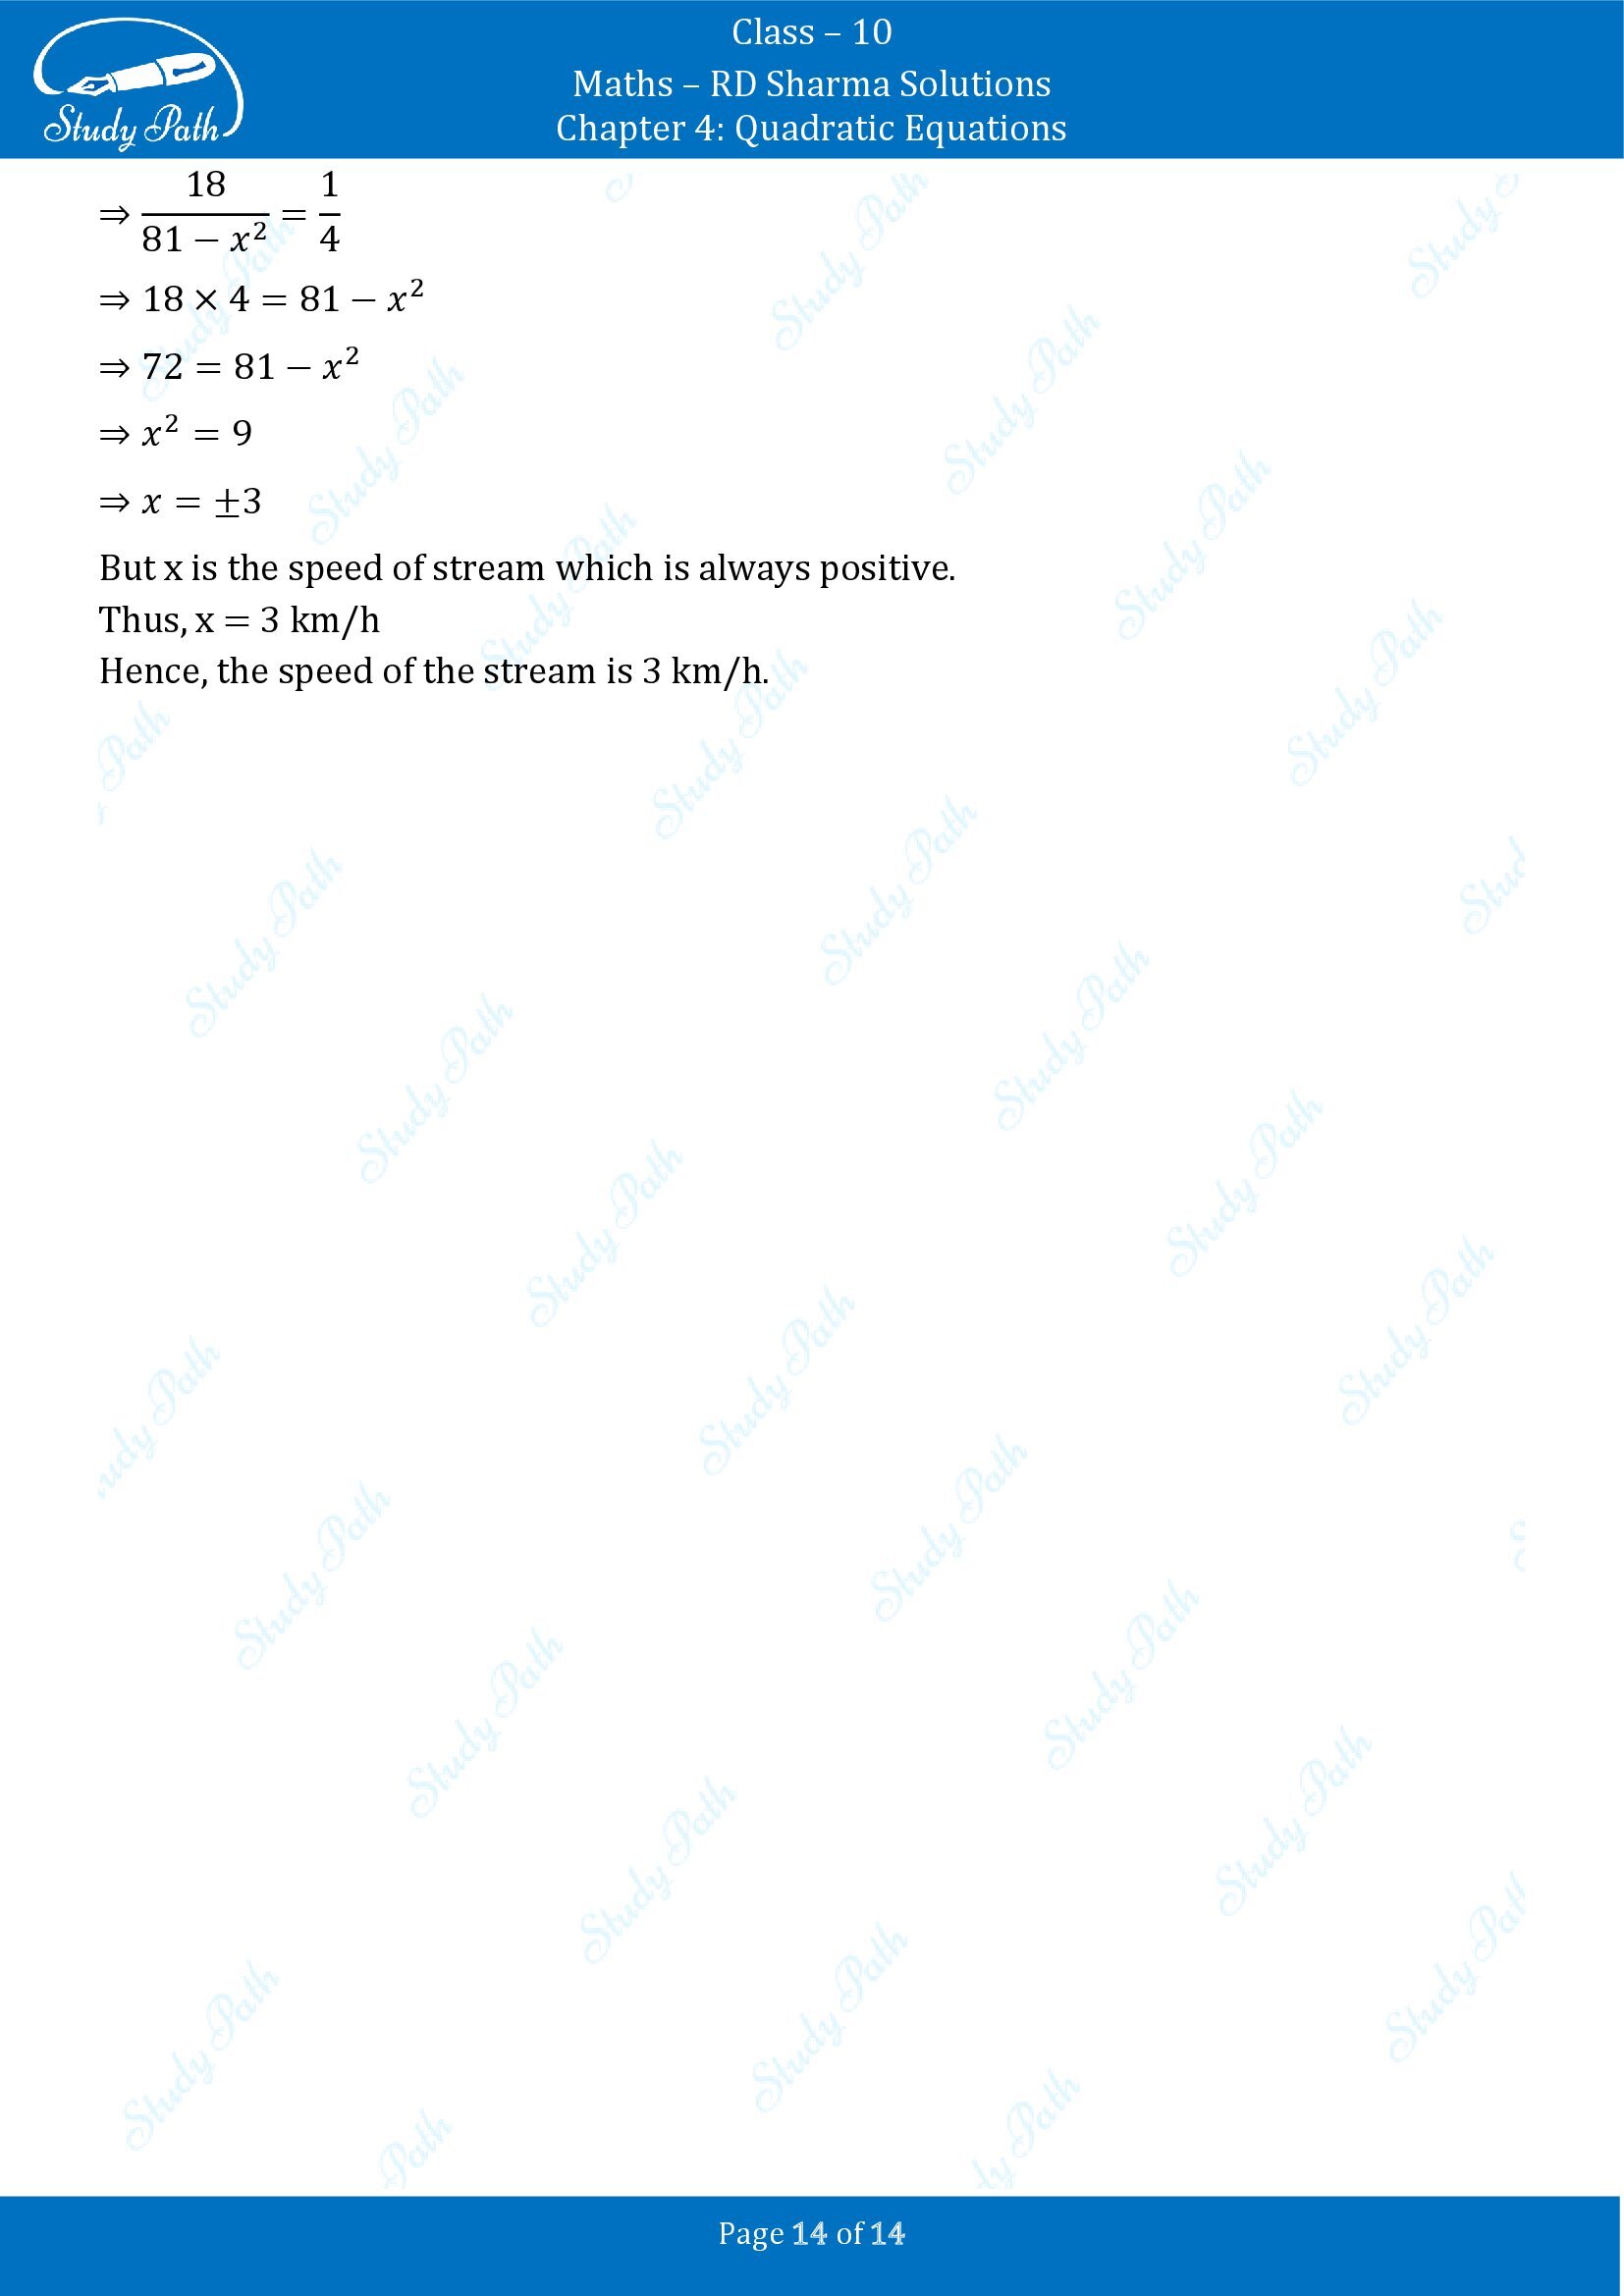 RD Sharma Solutions Class 10 Chapter 4 Quadratic Equations Exercise 4.8 00014